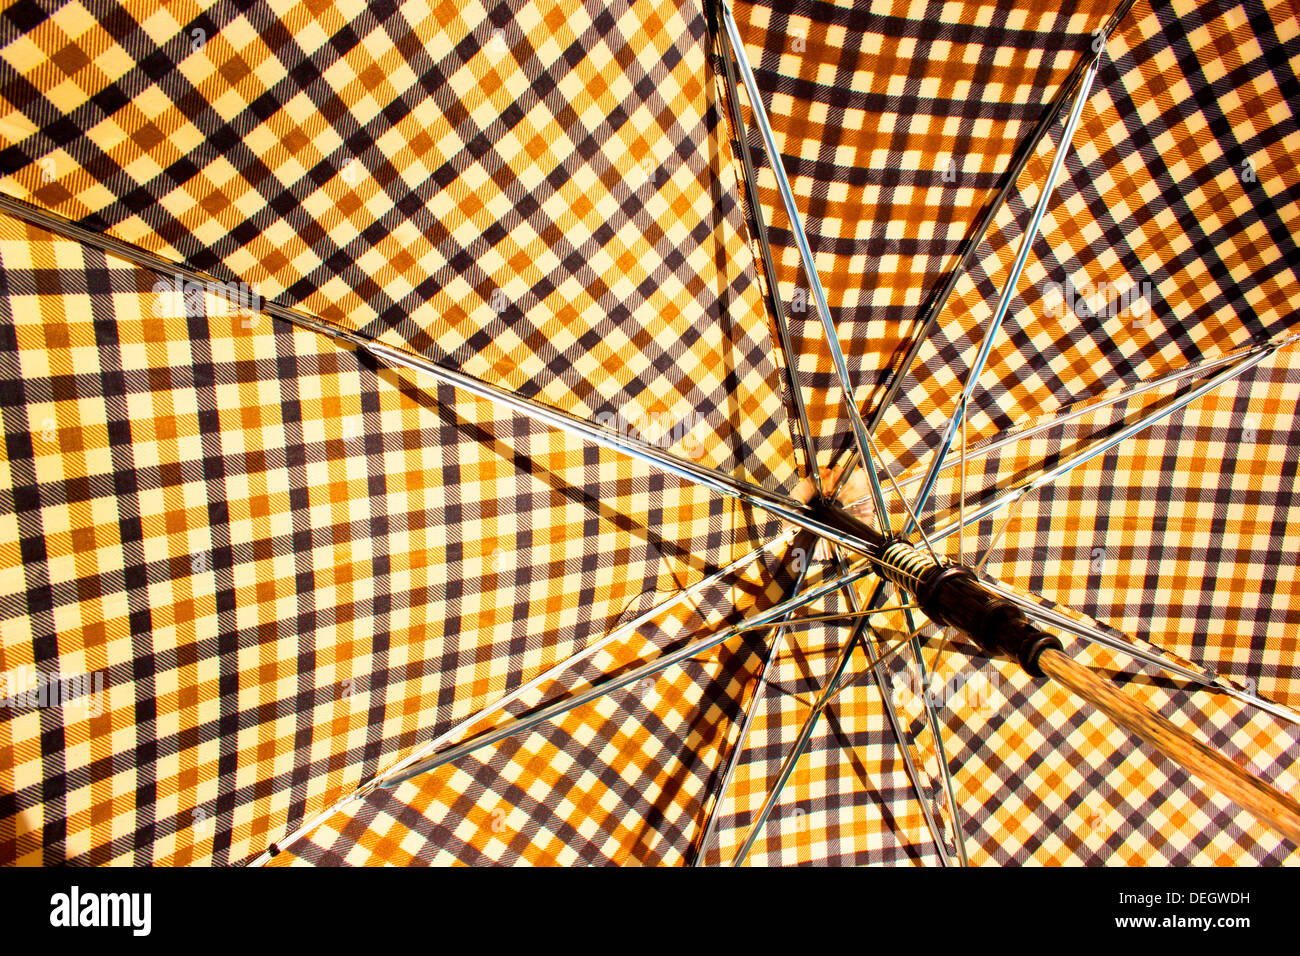 Abstract closeup of opened square retro patterned umbrella and handle Stock Photo